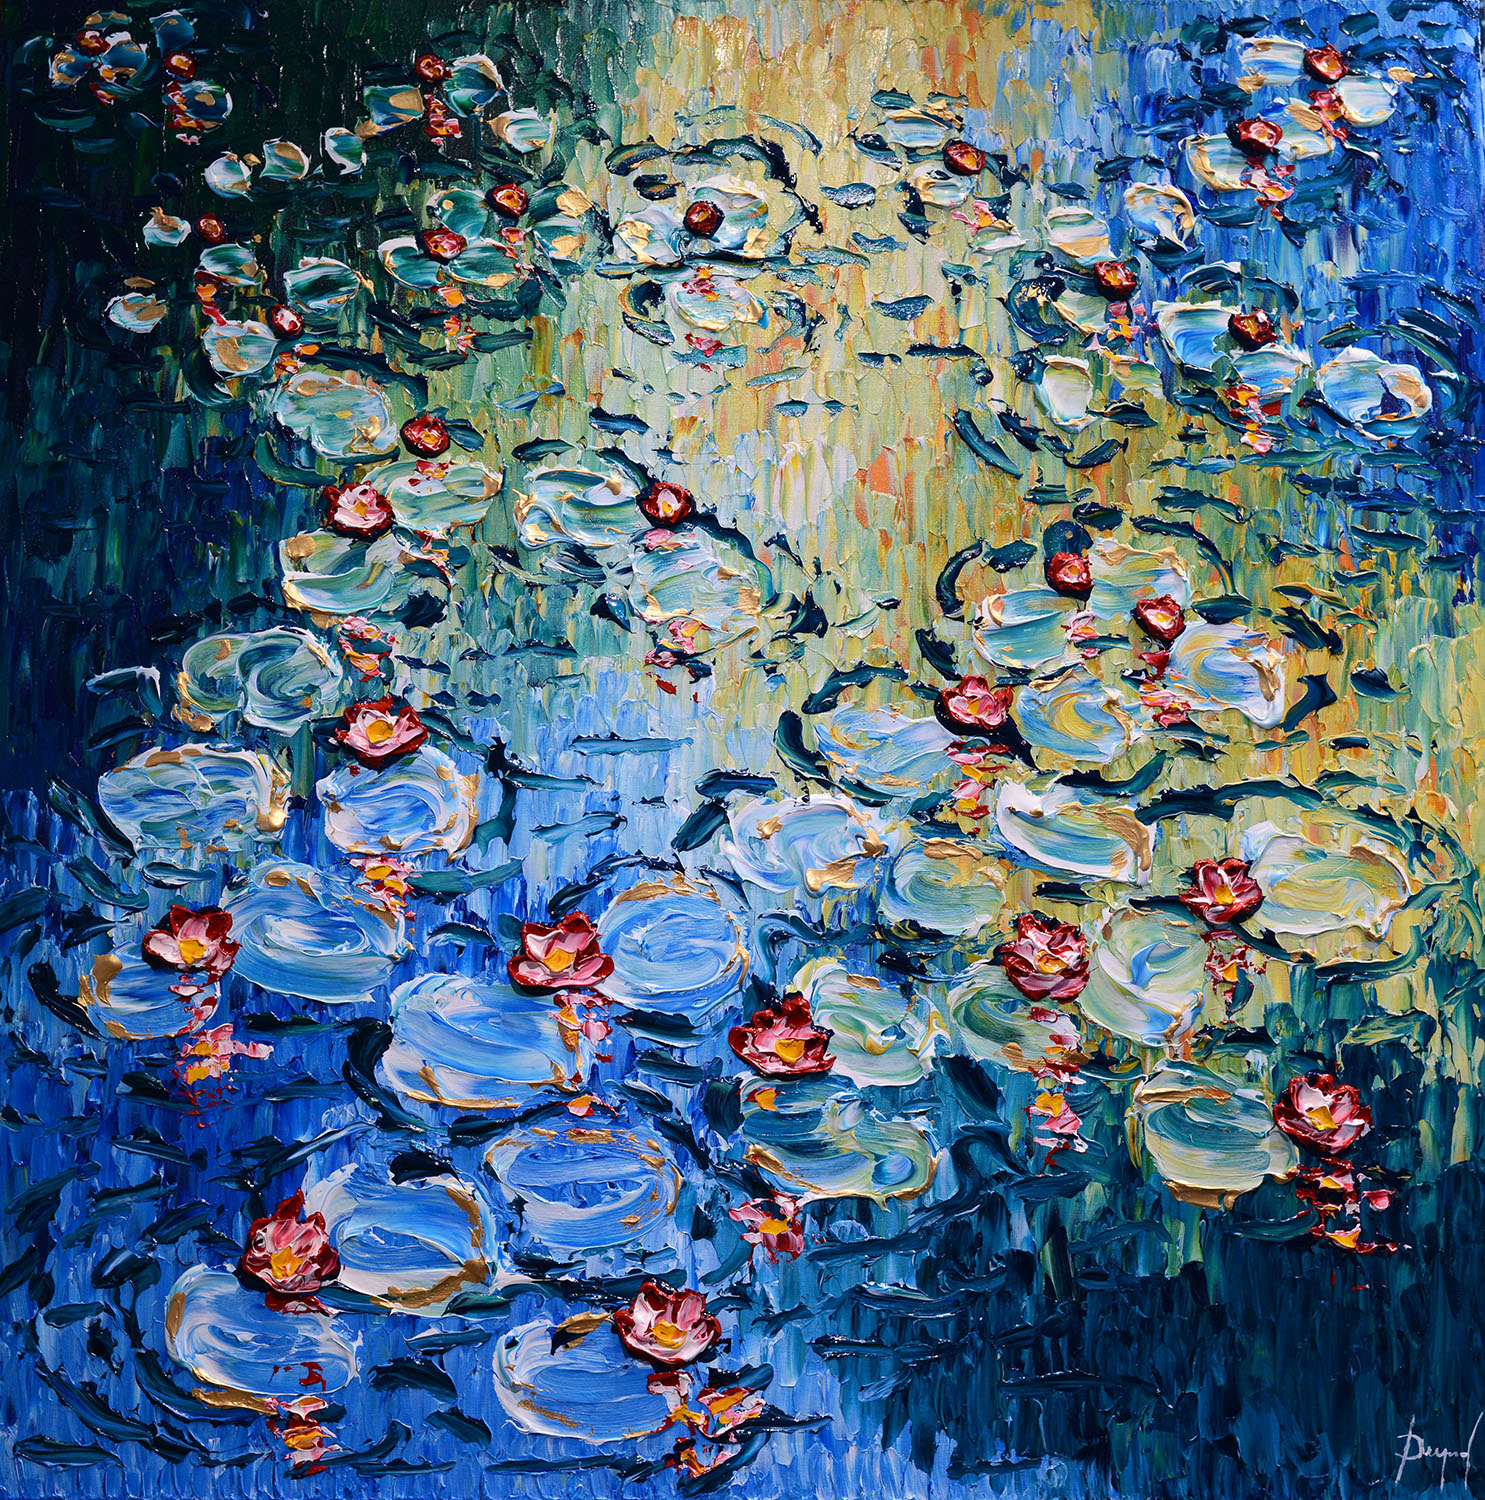 Water Lilies of Shimmering Colors 48x48